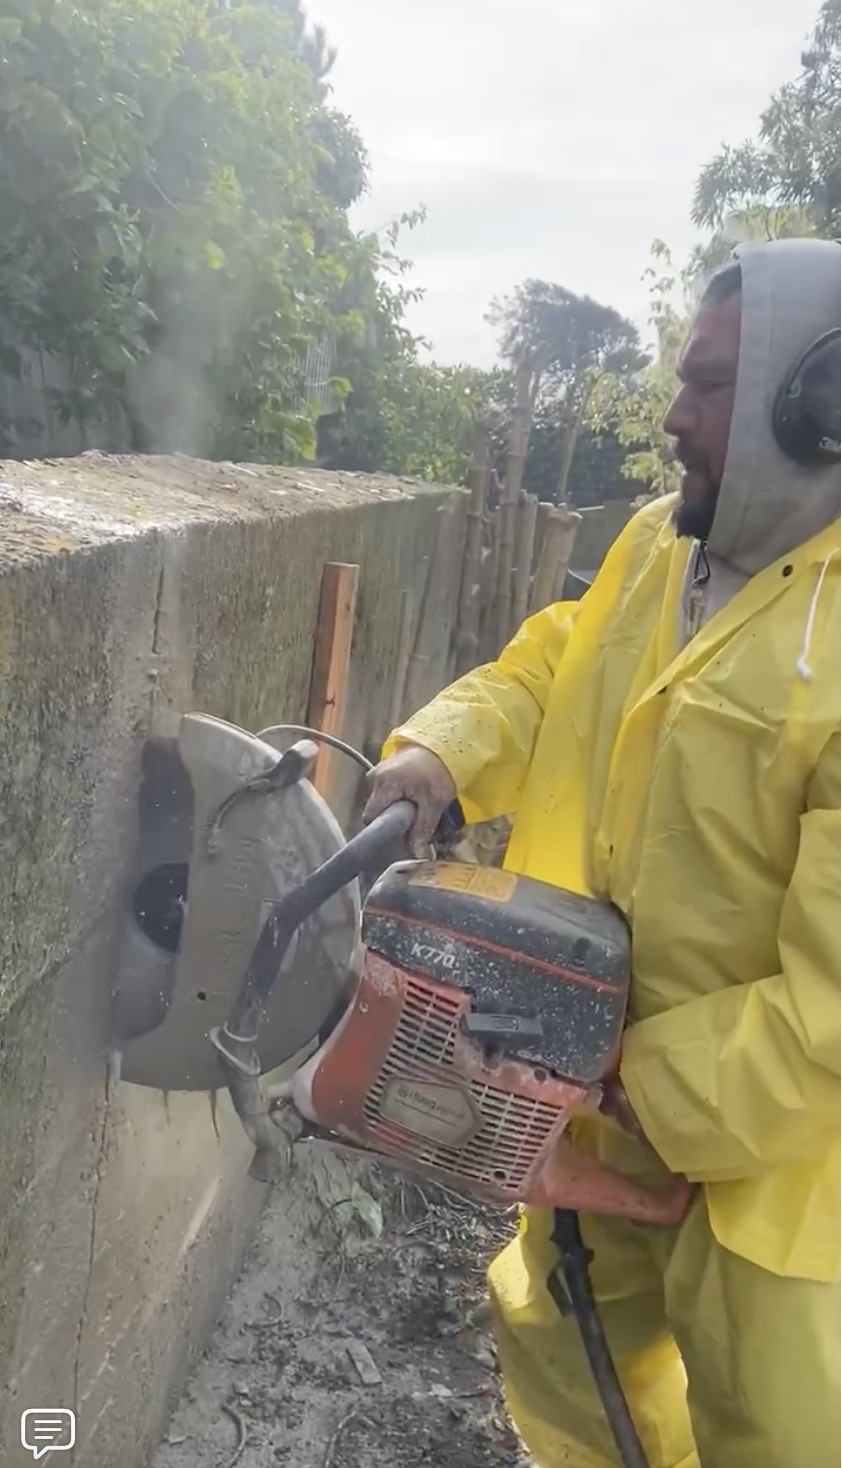 Demo of client's retaining wall using concrete saw held by worker in yellow protective suit.